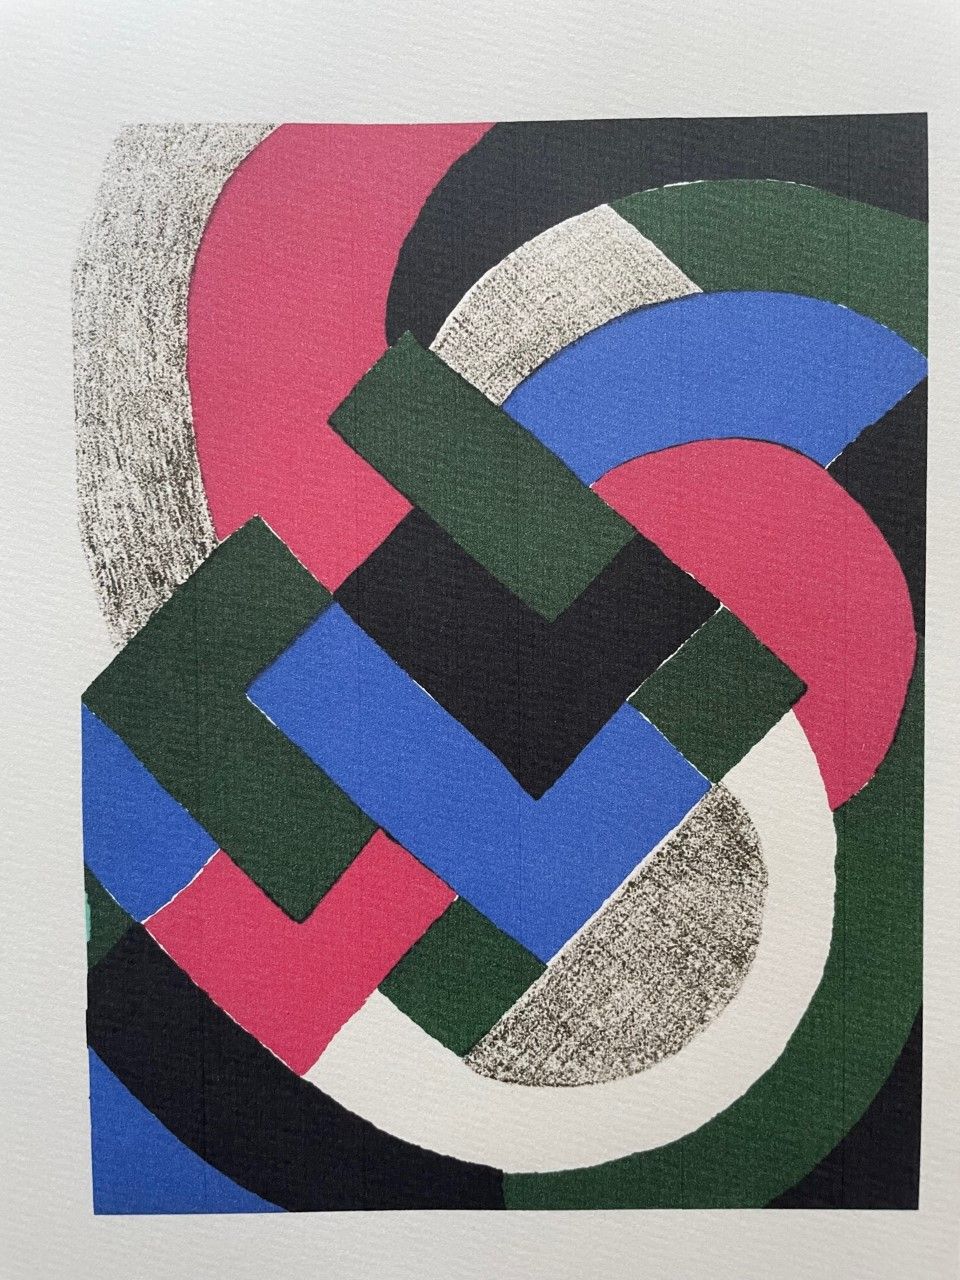 DELAUNAY Sonia (1885 - 1979) Print "COMPOSITION" after a work of the artist, Pap&hellip;